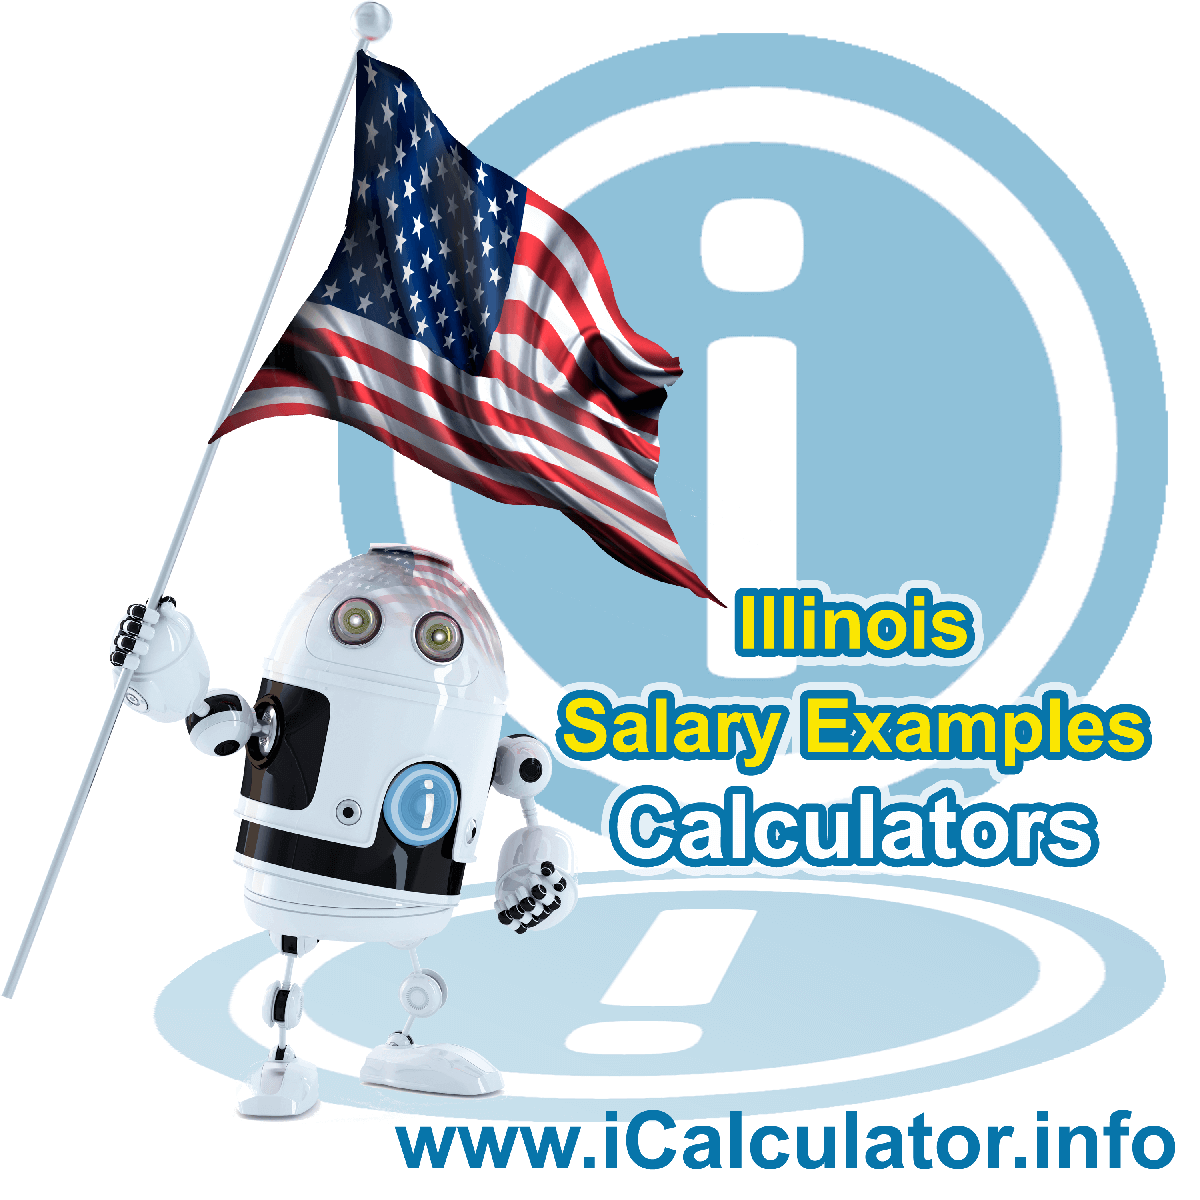 Illinois Salary Example for $ 10,000.00 in 2023 | iCalculator™ | $ 10,000.00 salary example for employee and employer paying Illinois State tincome taxes. Detailed salary after tax calculation including Illinois State Tax, Federal State Tax, Medicare Deductions, Social Security, Capital Gains and other income tax and salary deductions complete with supporting Illinois state tax tables 